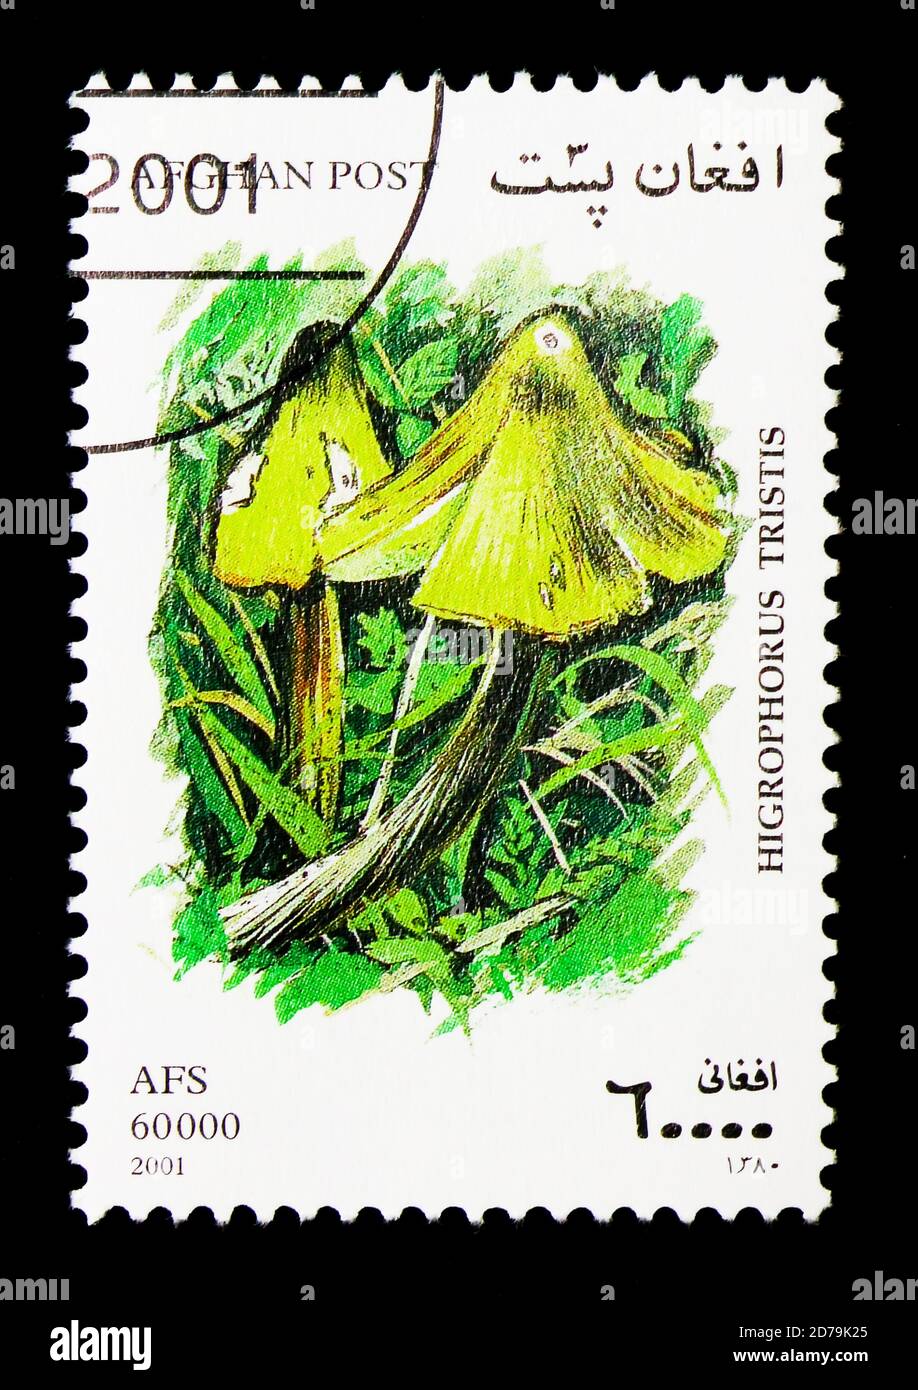 MOSCOW, RUSSIA - DECEMBER 21, 2017: A stamp printed in Afghanistan shows Blackening Waxcap (Hygrophorus tristis), Mushrooms serie, circa 2001 Stock Photo